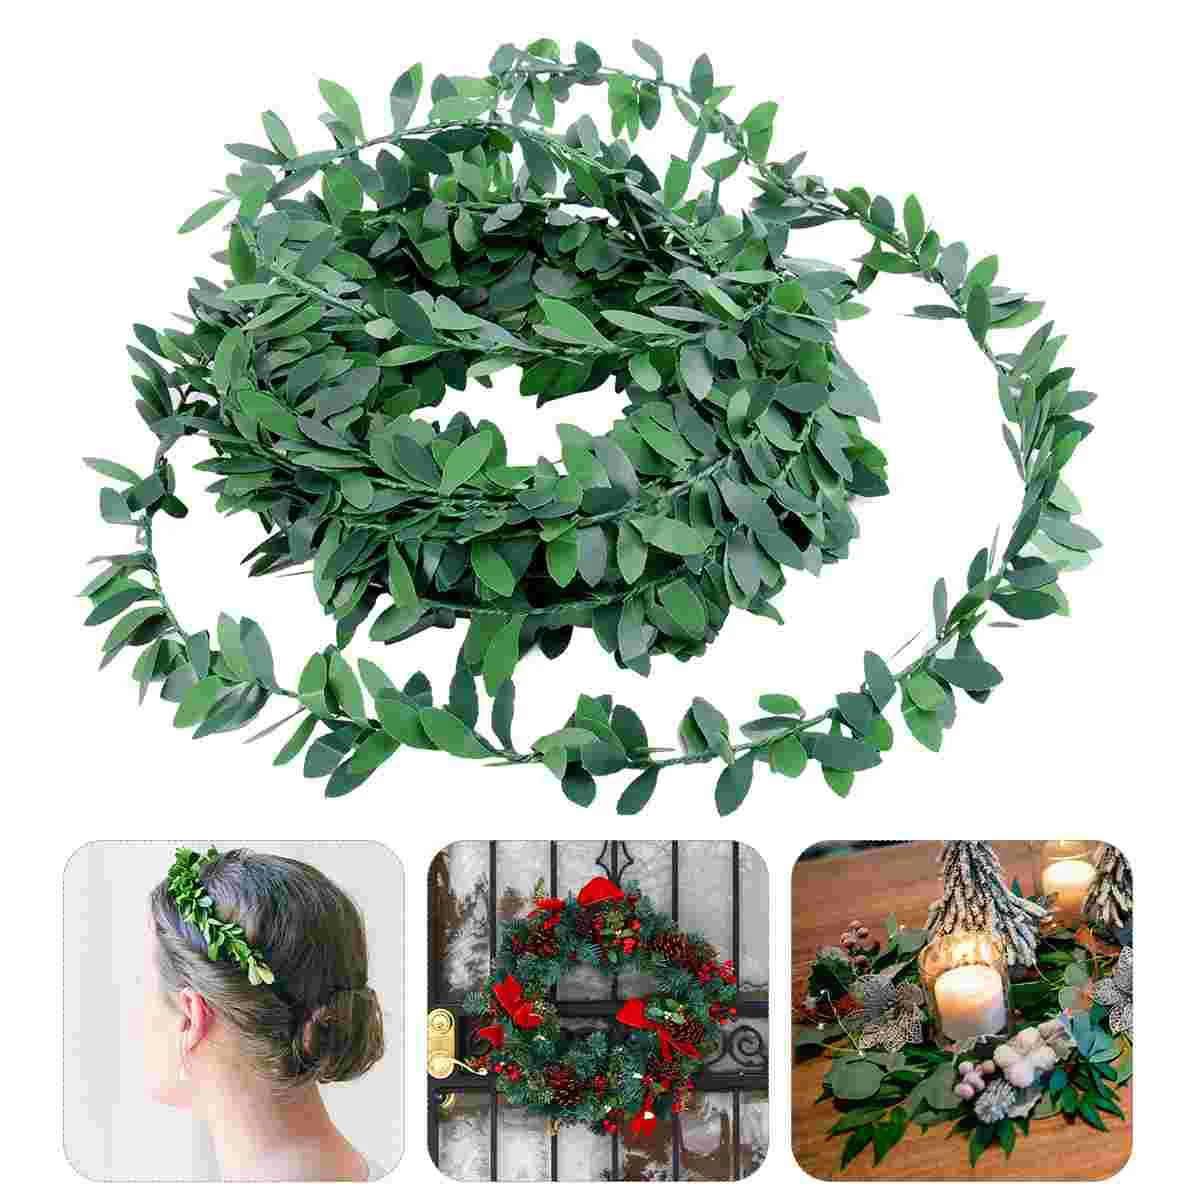 

7 5m Ivy Garland Foliage Green Leaves Vine Artificial Simulated Vine Hanging Plants String for Wedding Party Ceremony DIY